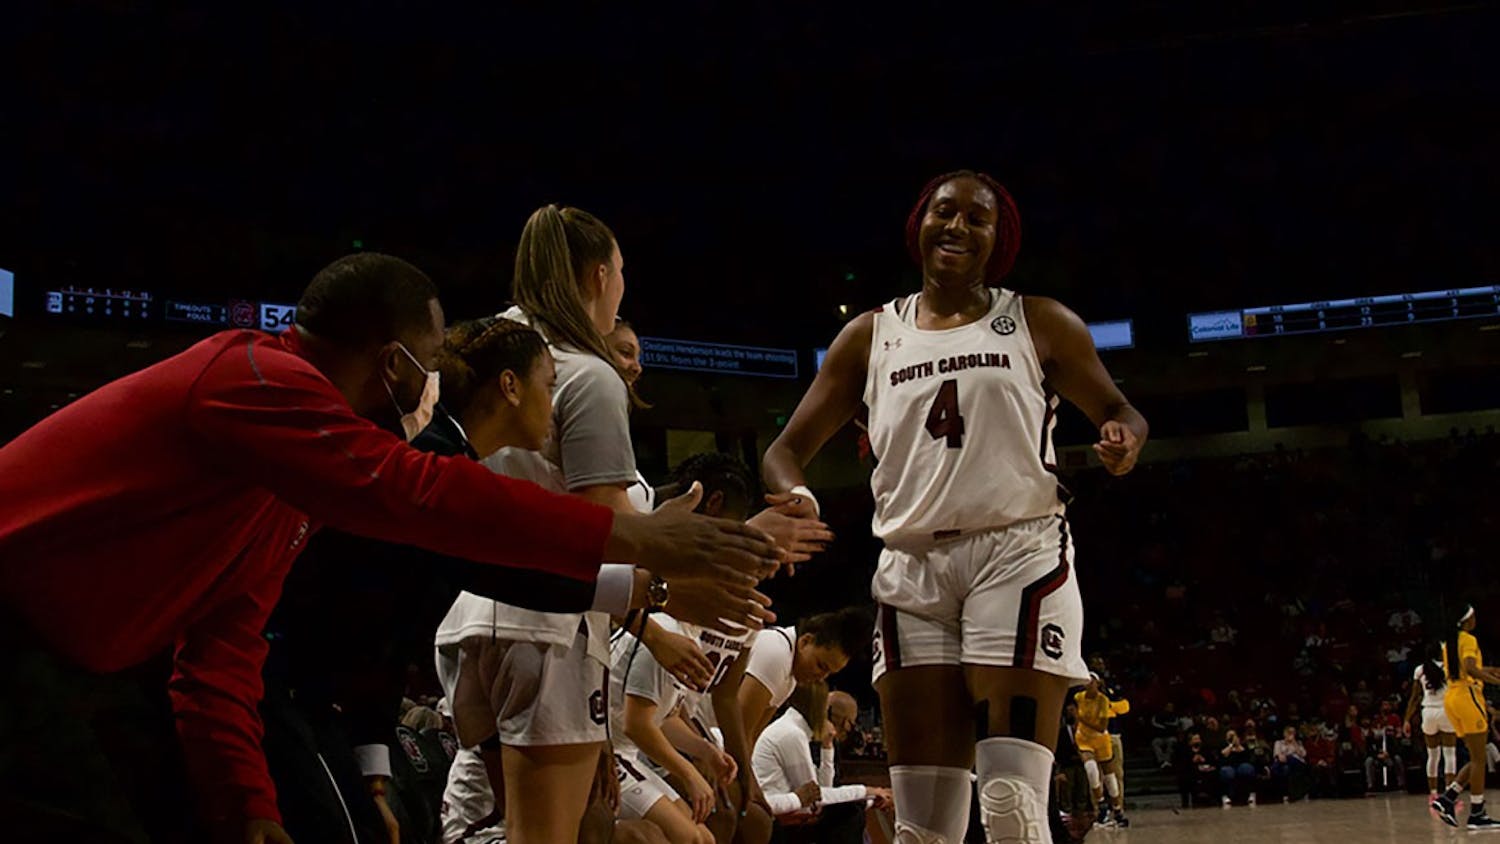 Junior forward Aliyah Boston's teammates congratulate her after making a layup in the game against North Carolina A&amp;T. The Gamecocks earned 79 points against the Aggies in Monday night's matchup&nbsp;in Columbia.&nbsp;